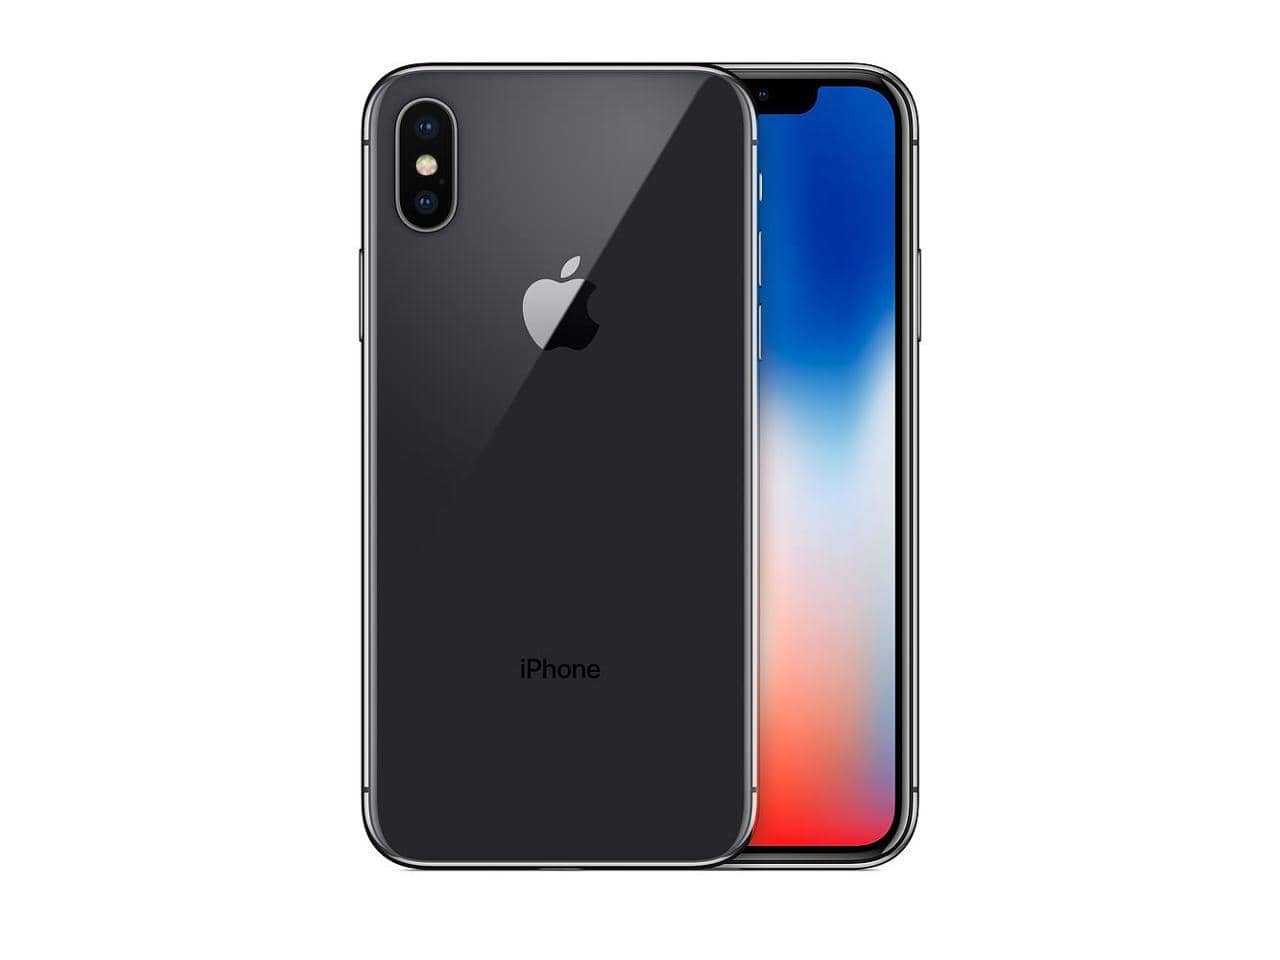 Apple iPhone X Full Phone Technical Specifications